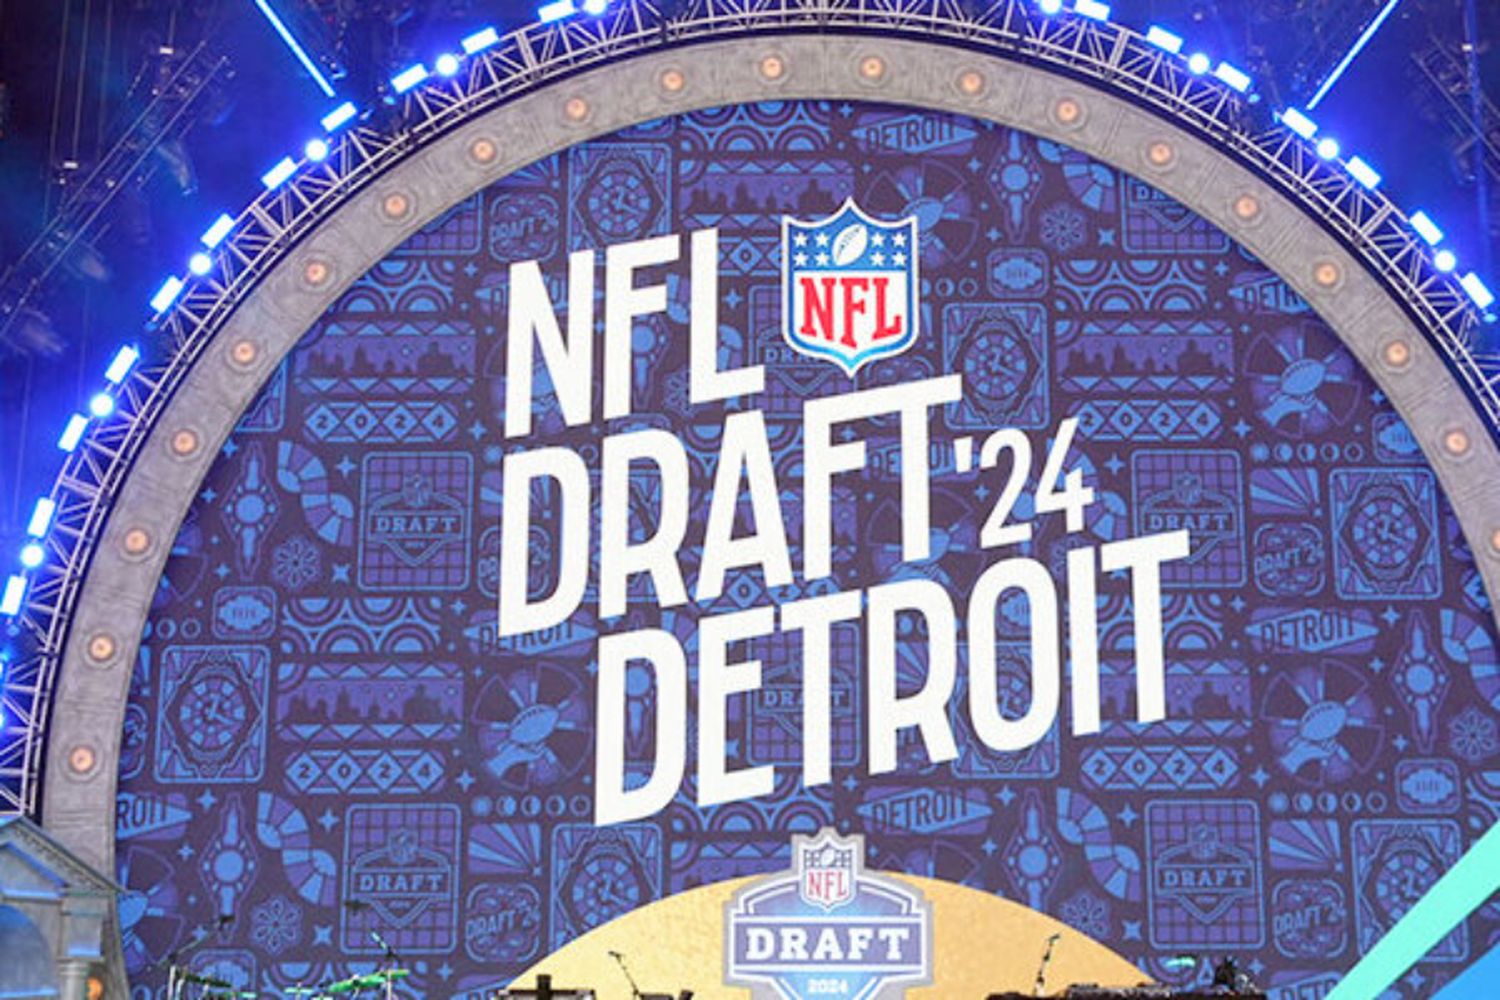 Detroit sets a new attendance record at the 2024 NFL Draft, turning the city into the epicenter of football fandom and historic first-round selections.